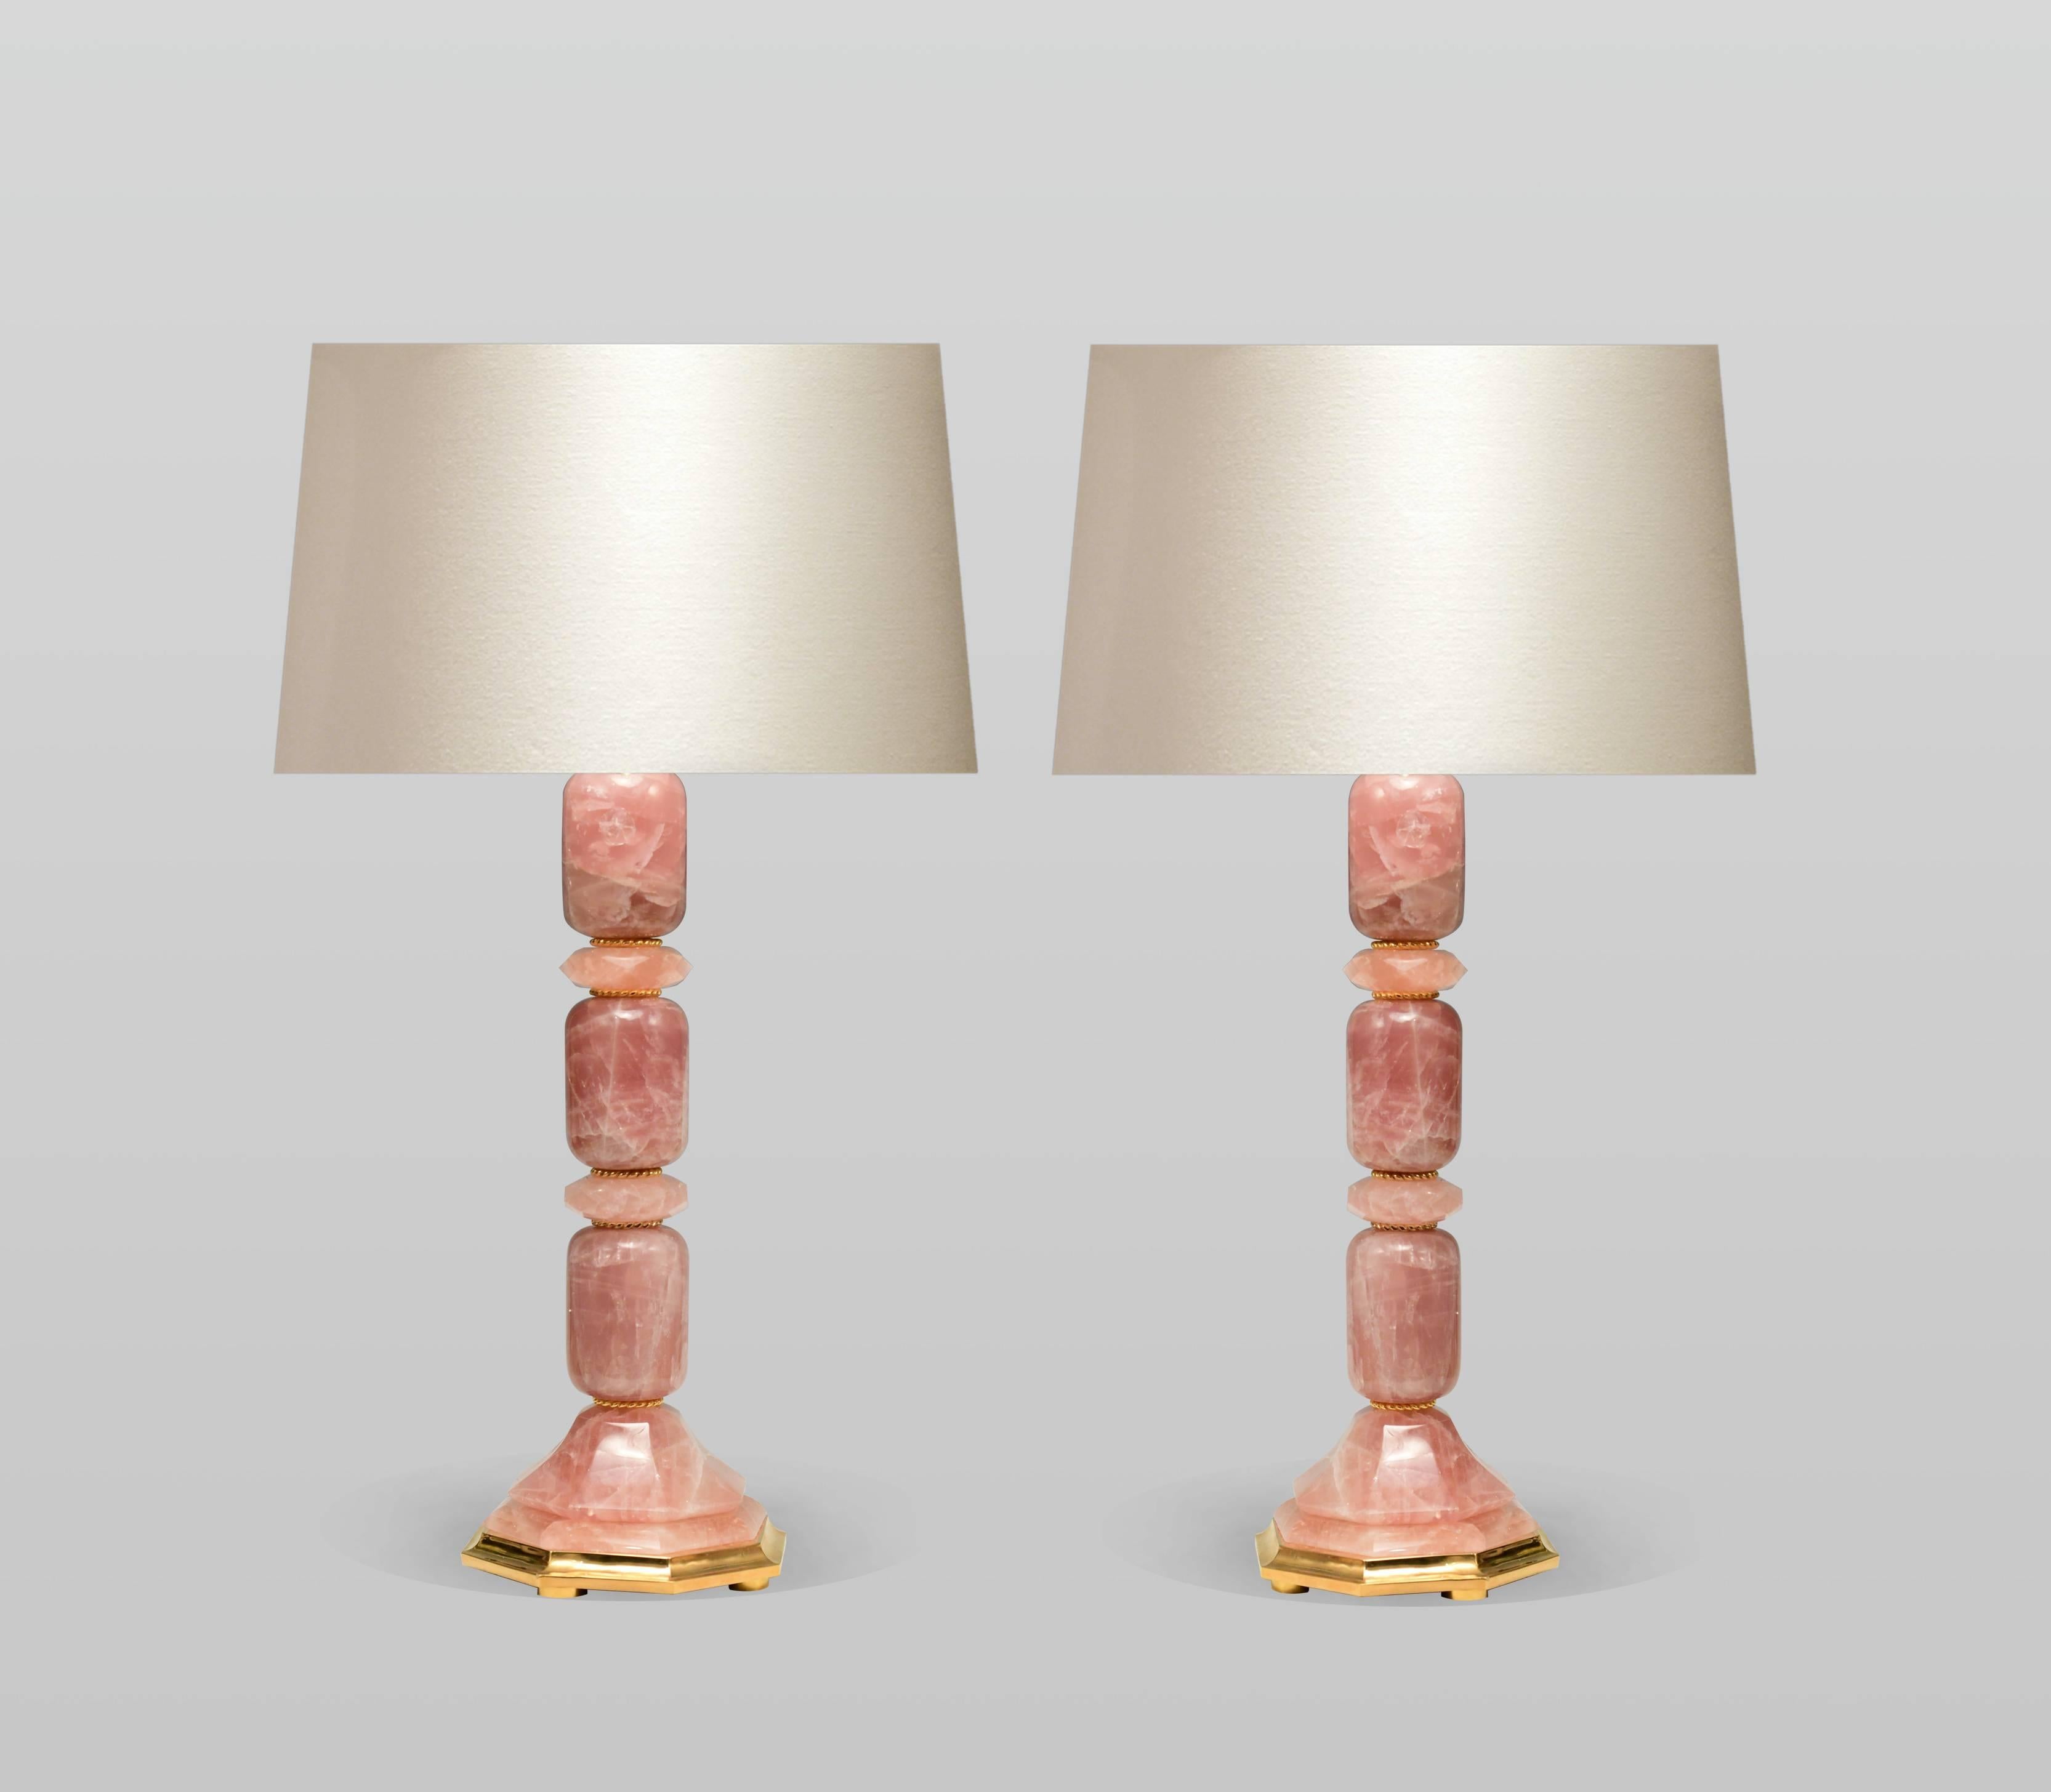 A pair of modern rose rock crystal table lamps with polish brass bases.
Measures: 8